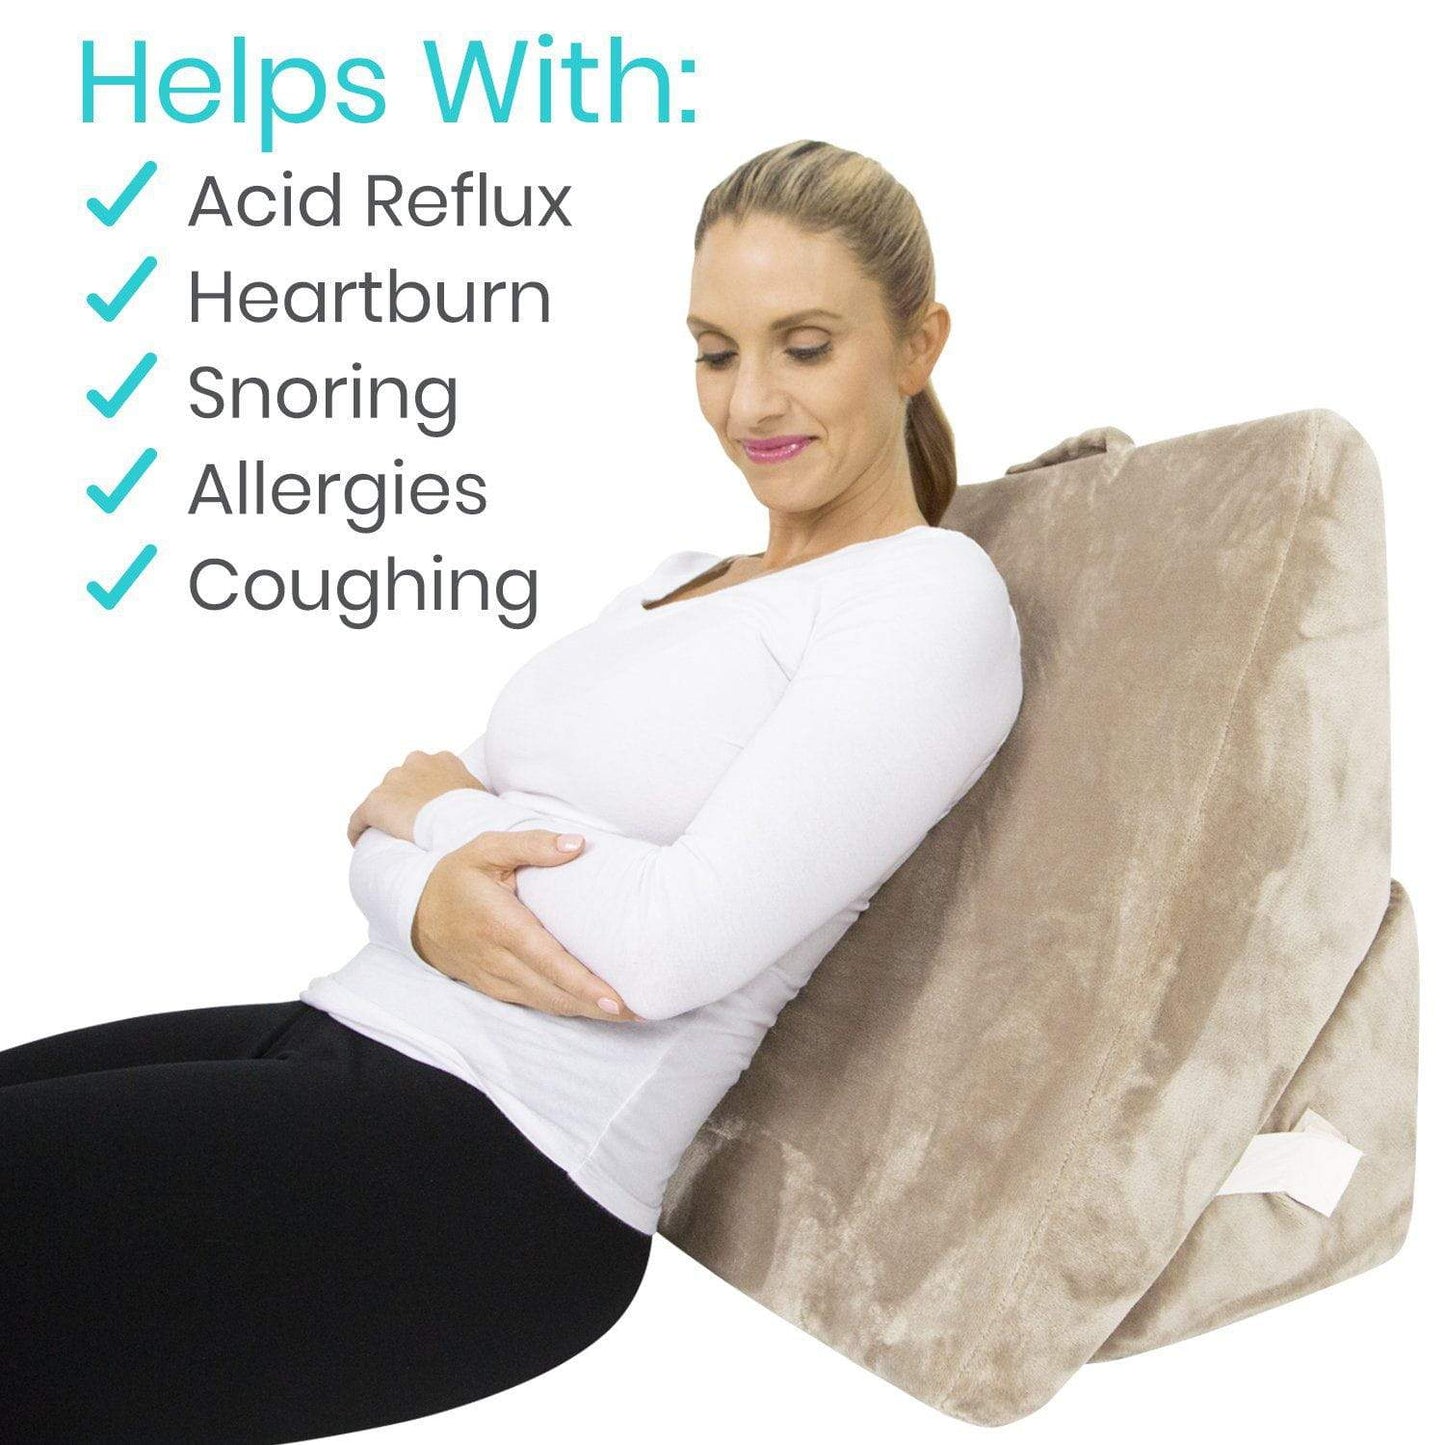 4 in 1 Bed Wedge for Better Breathing and Elevation list of benefits from AskSAMIE